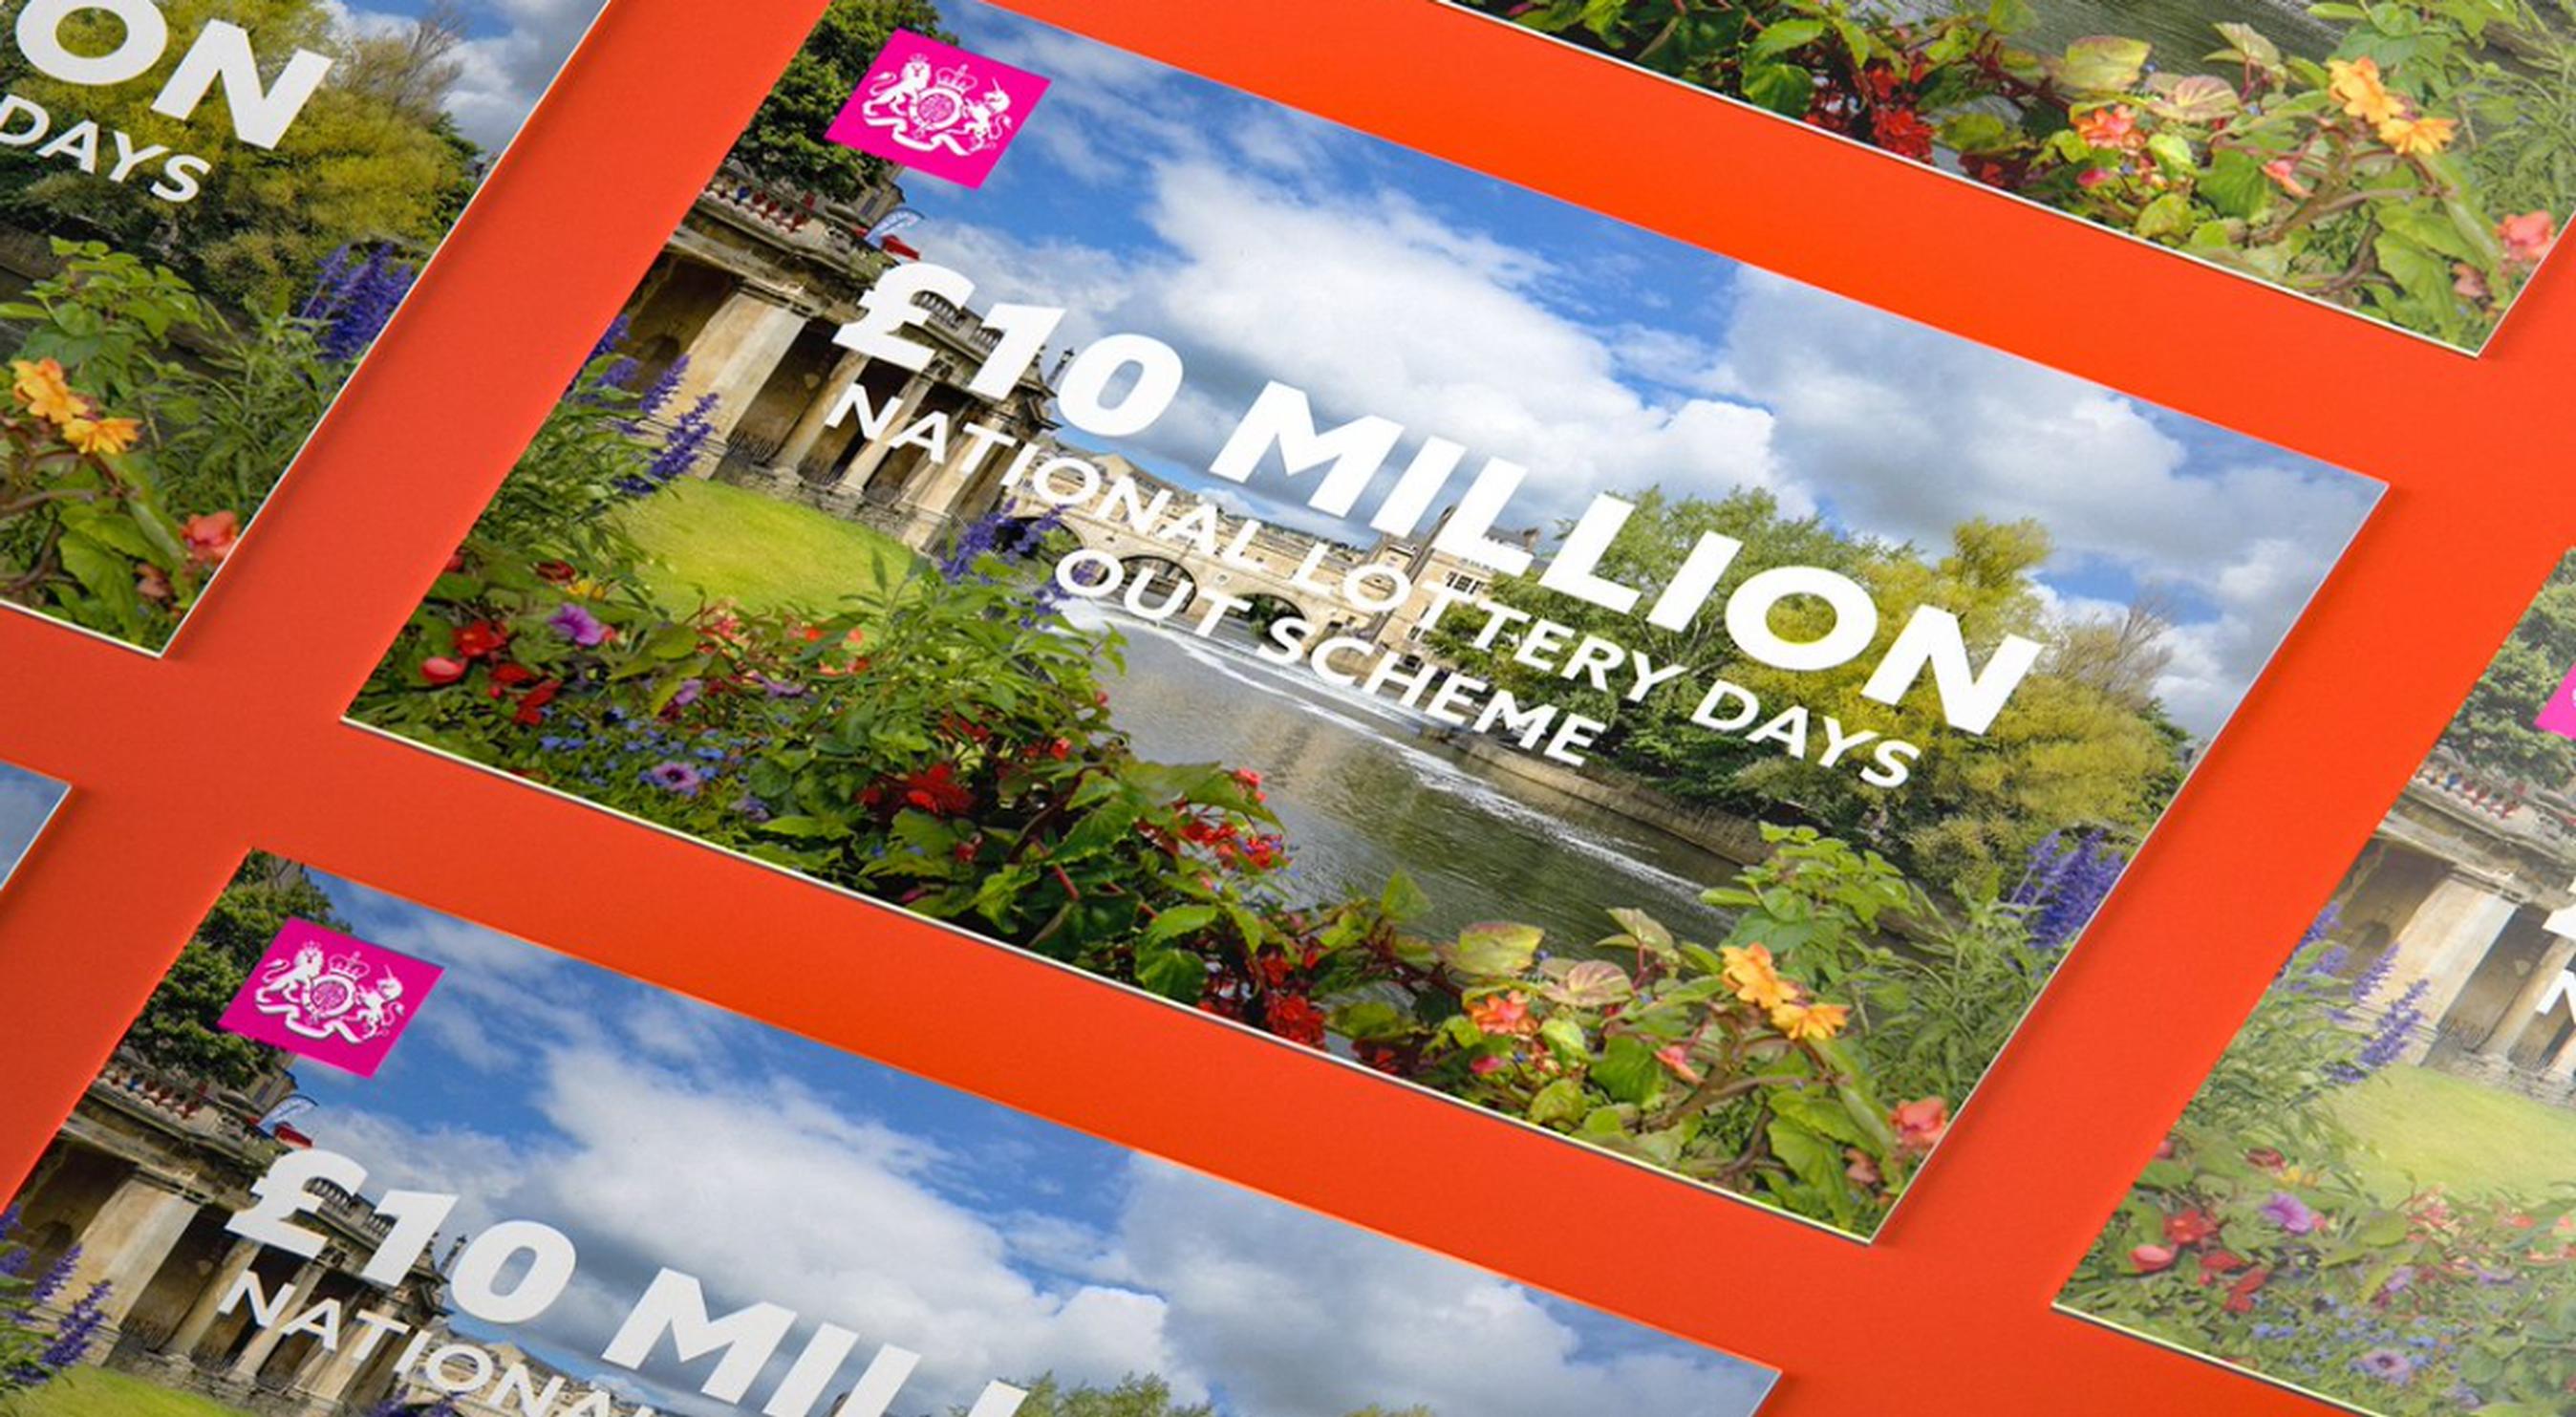 National Lottery players will be offered vouchers to attractions